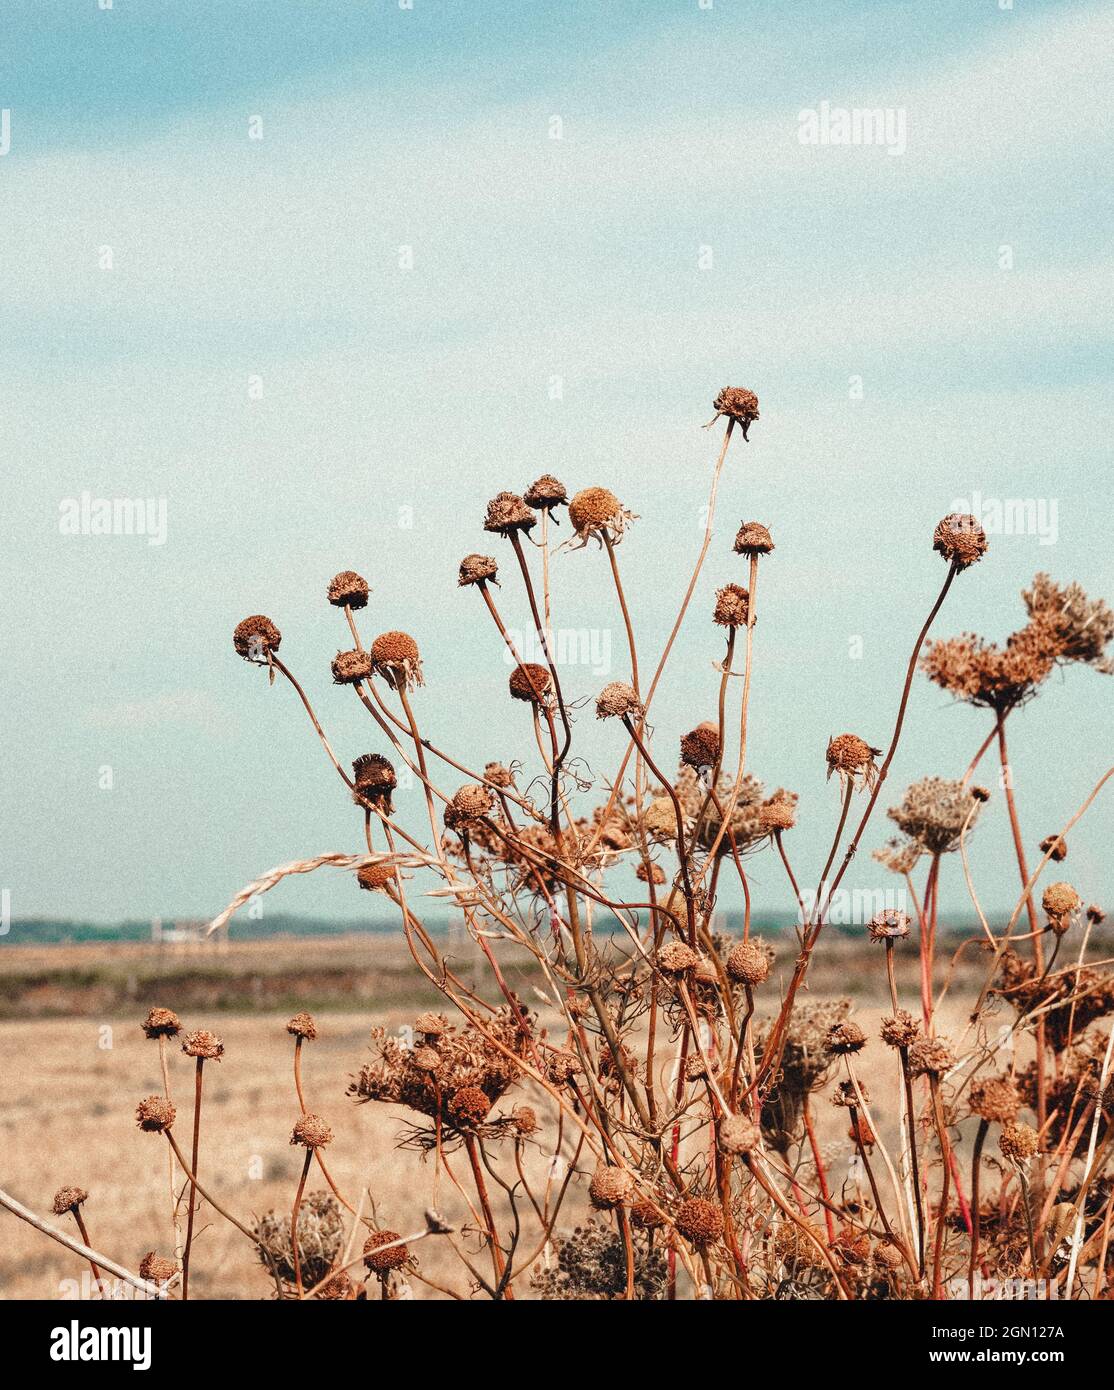 Closeup of wild dying chamomile flowers in an empty field with retro vintage grainy edit. Pale blue sky, pale orange grass in background. Vertica Stock Photo